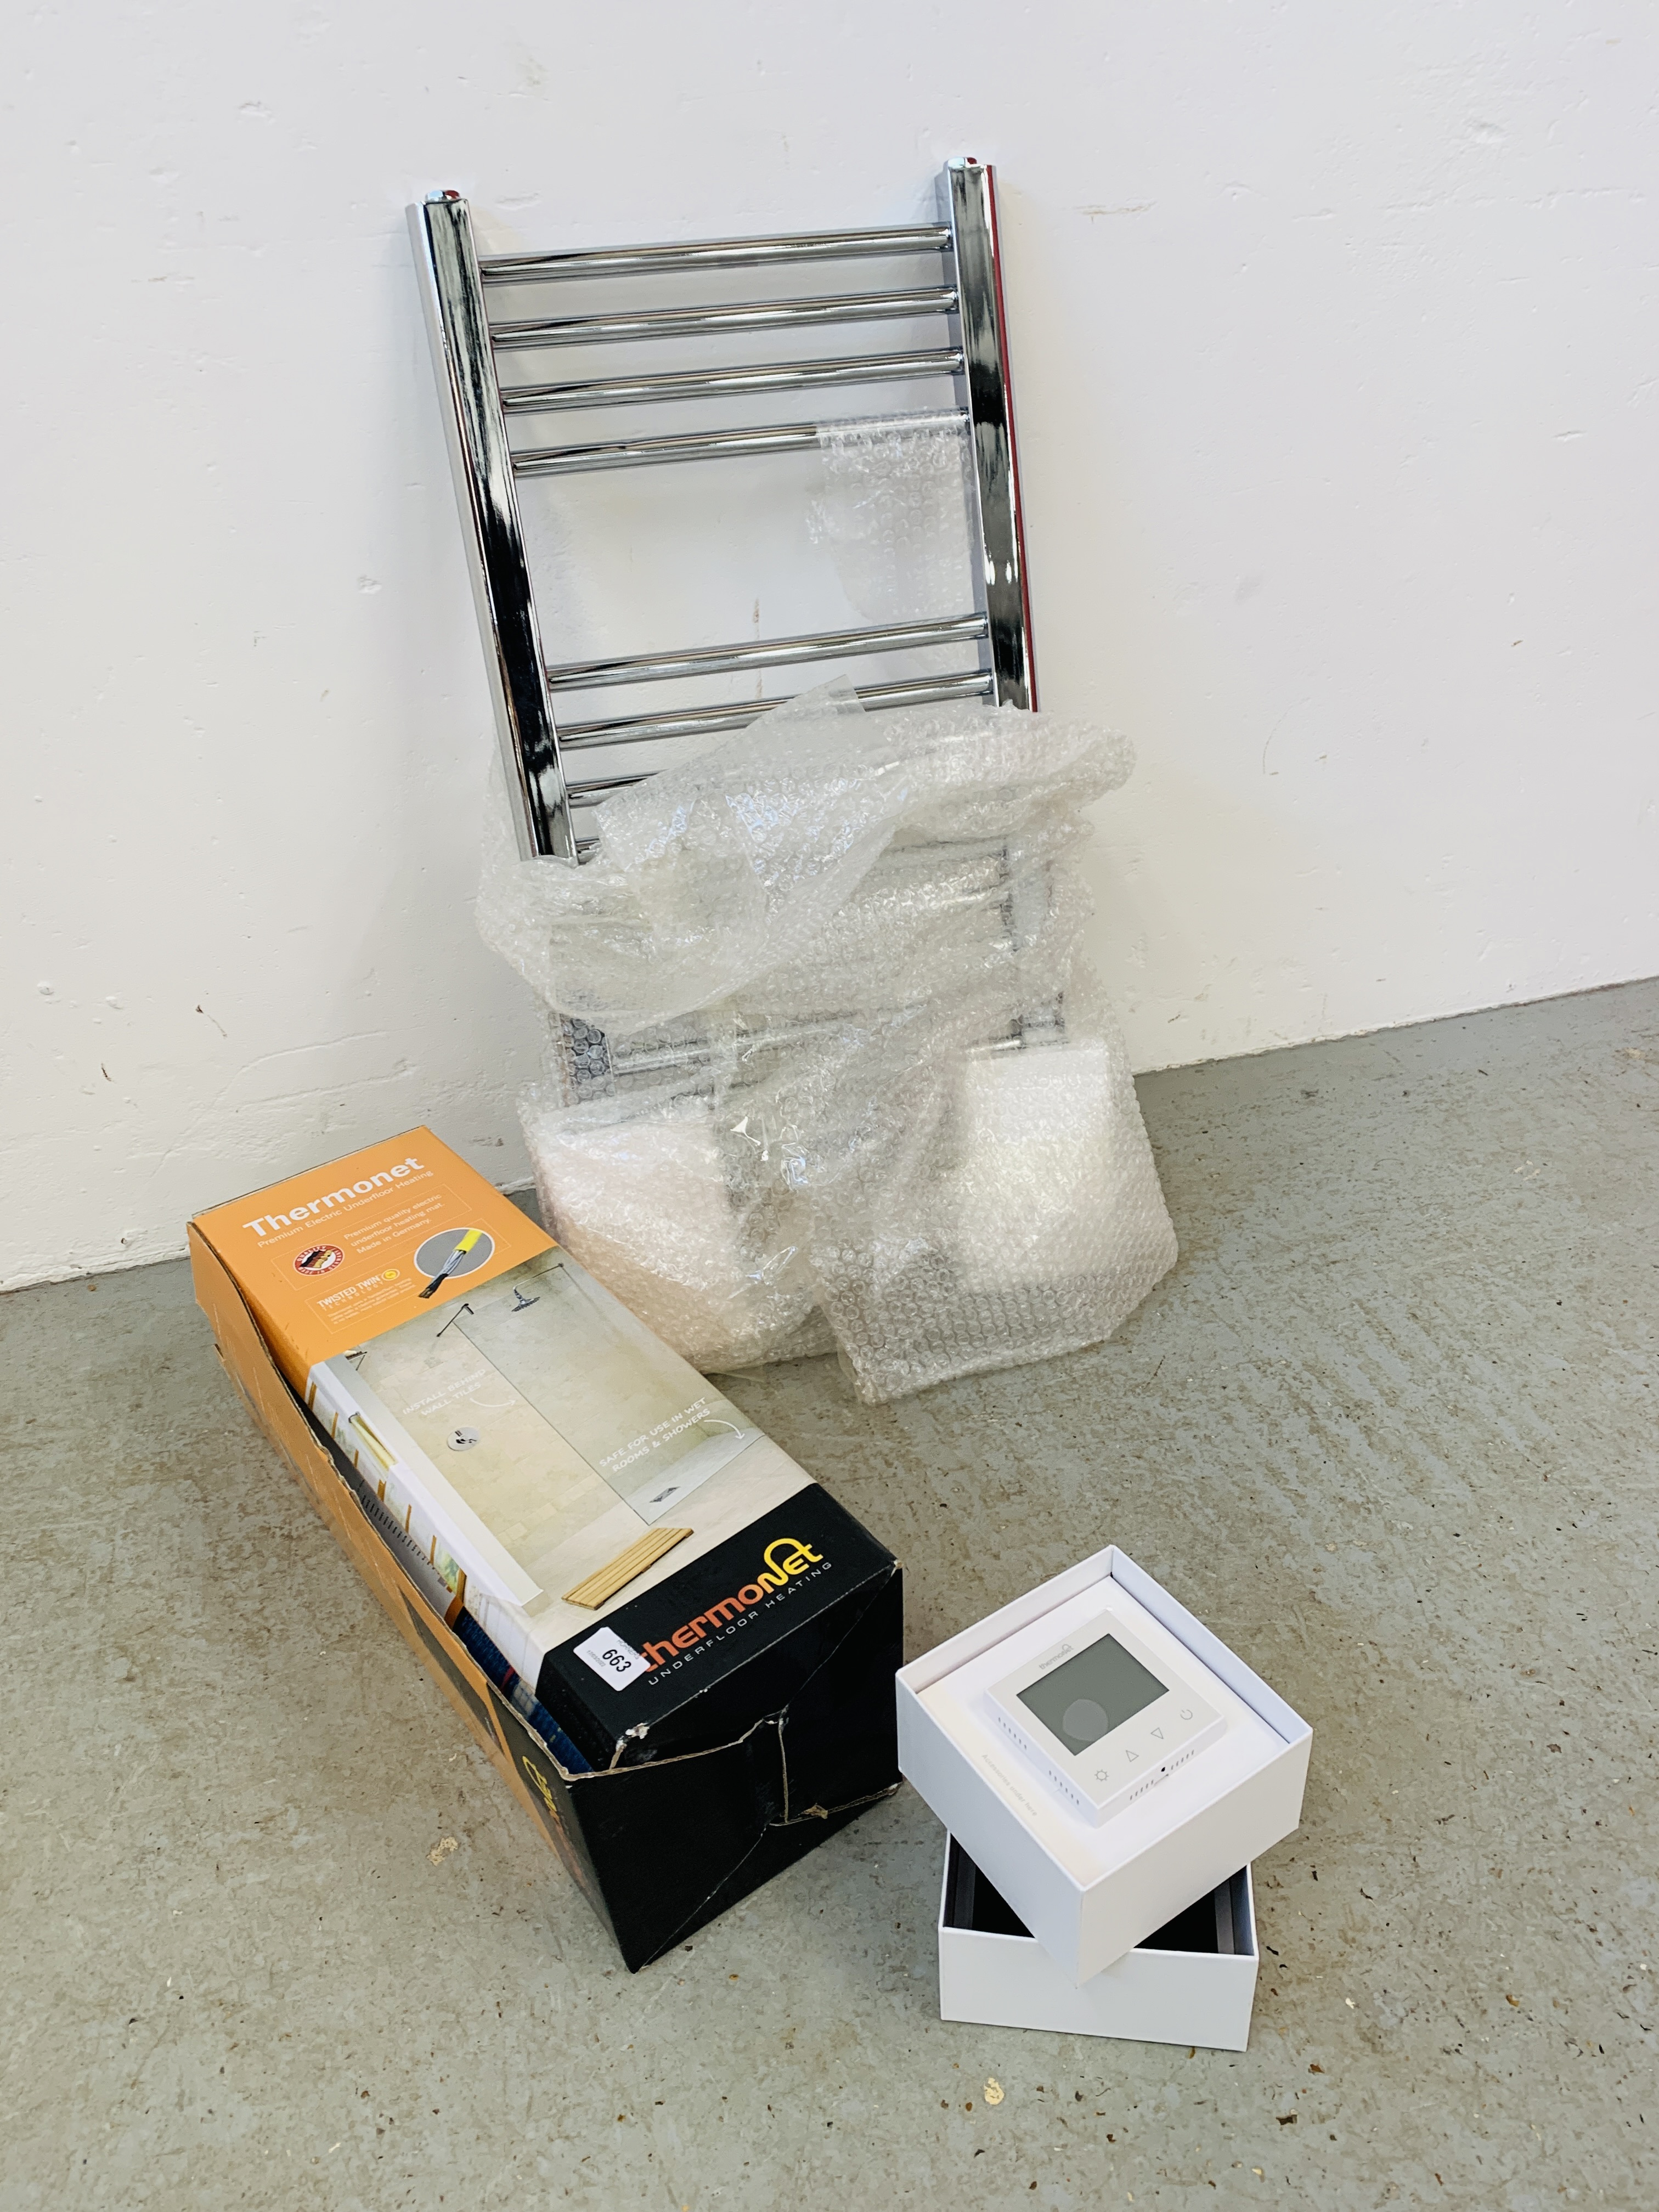 A BOXED THERMONET UNDER FLOOR HEATING SYSTEM WITH THERMOSTAT AND CHROME BATHROOM TOWEL RAIL - SOLD